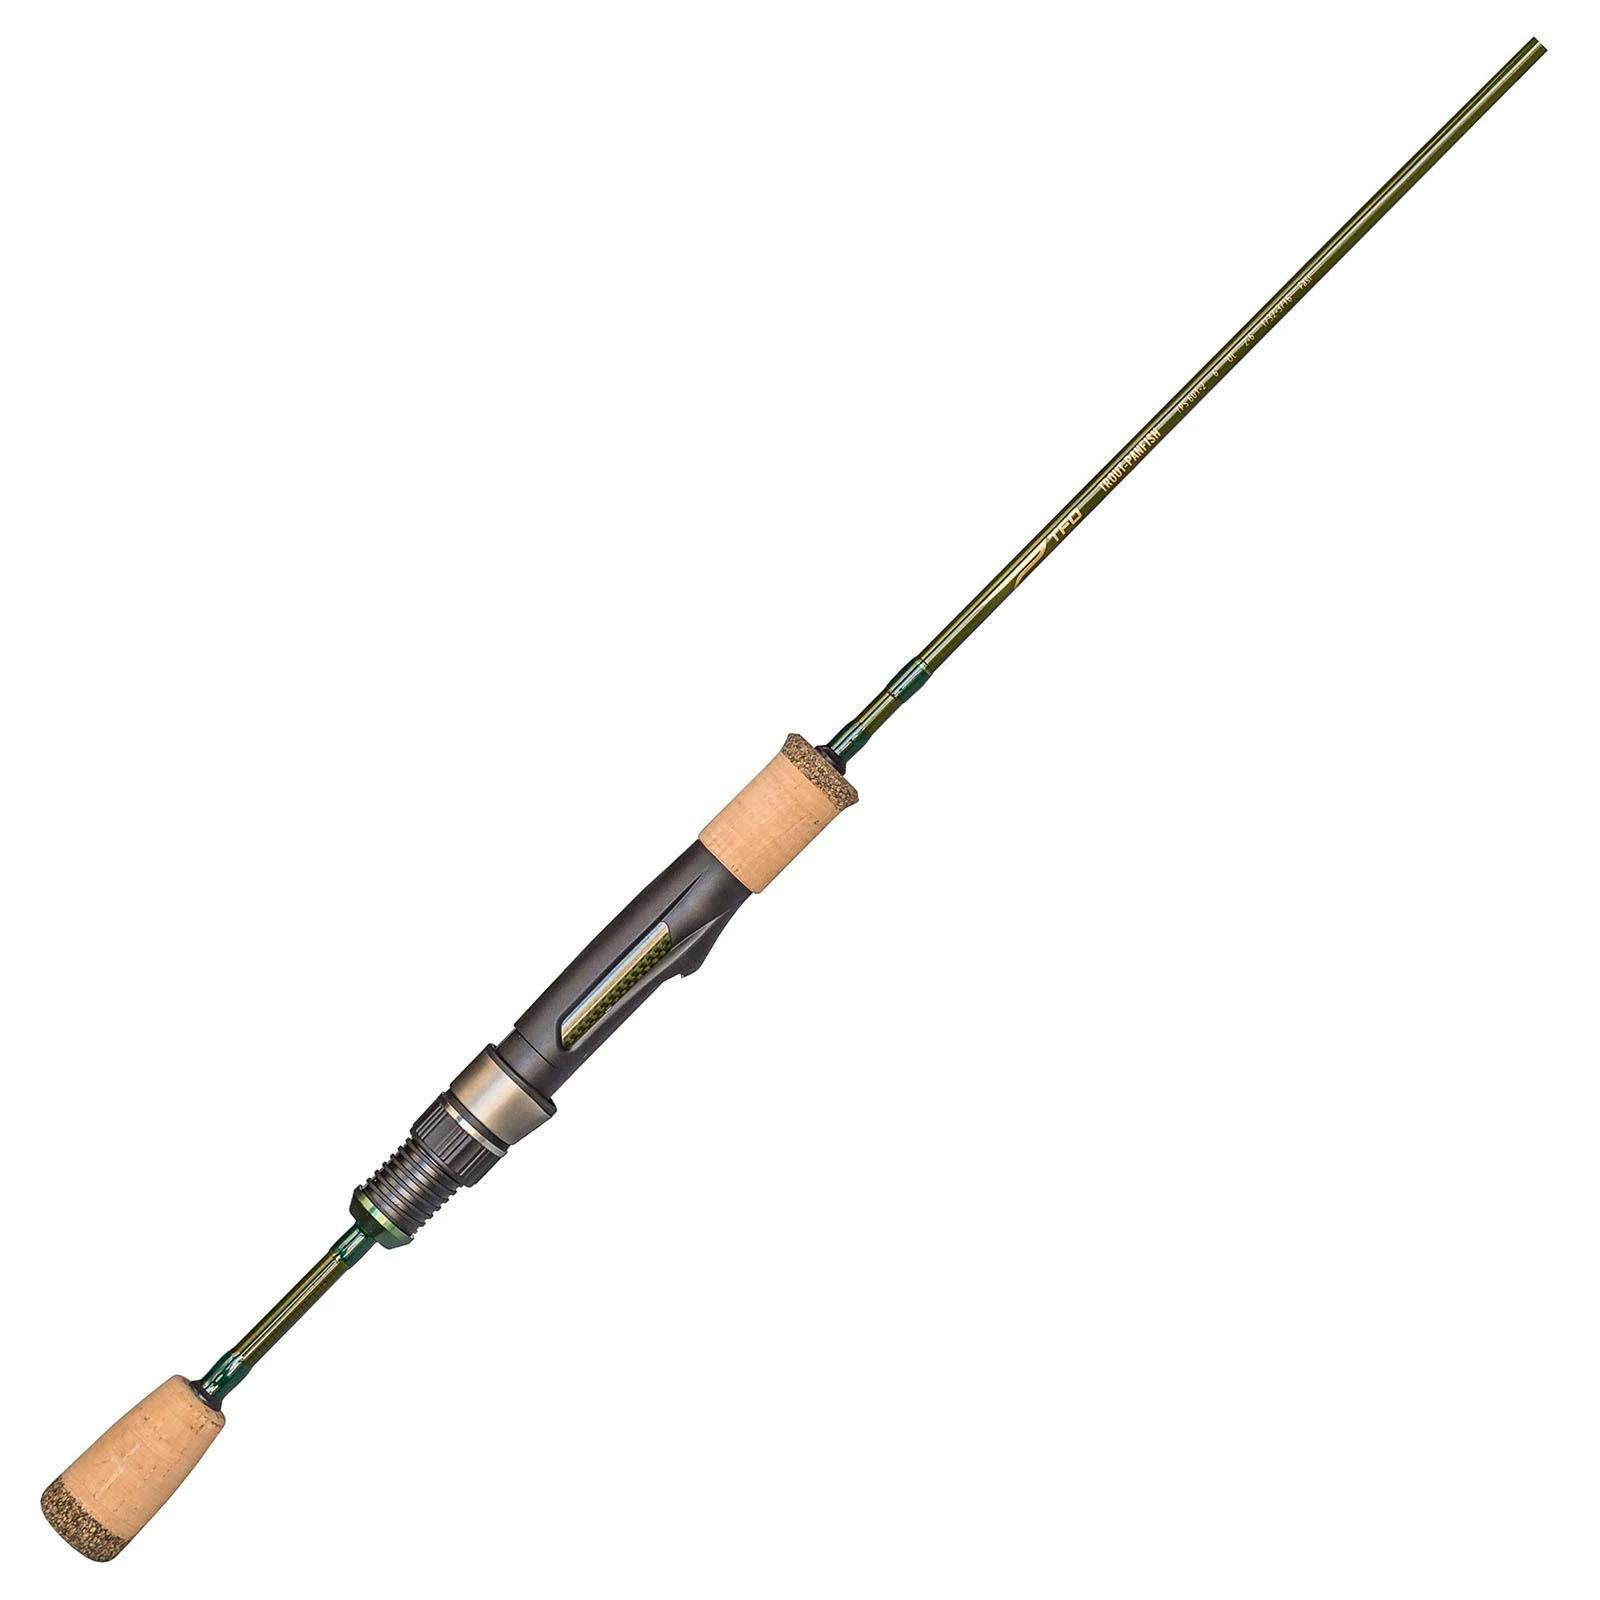 Artemis Casting Fishing Rod 5'6'' Fast Action 1-6LB Carbon Freshwater Trout Rod 